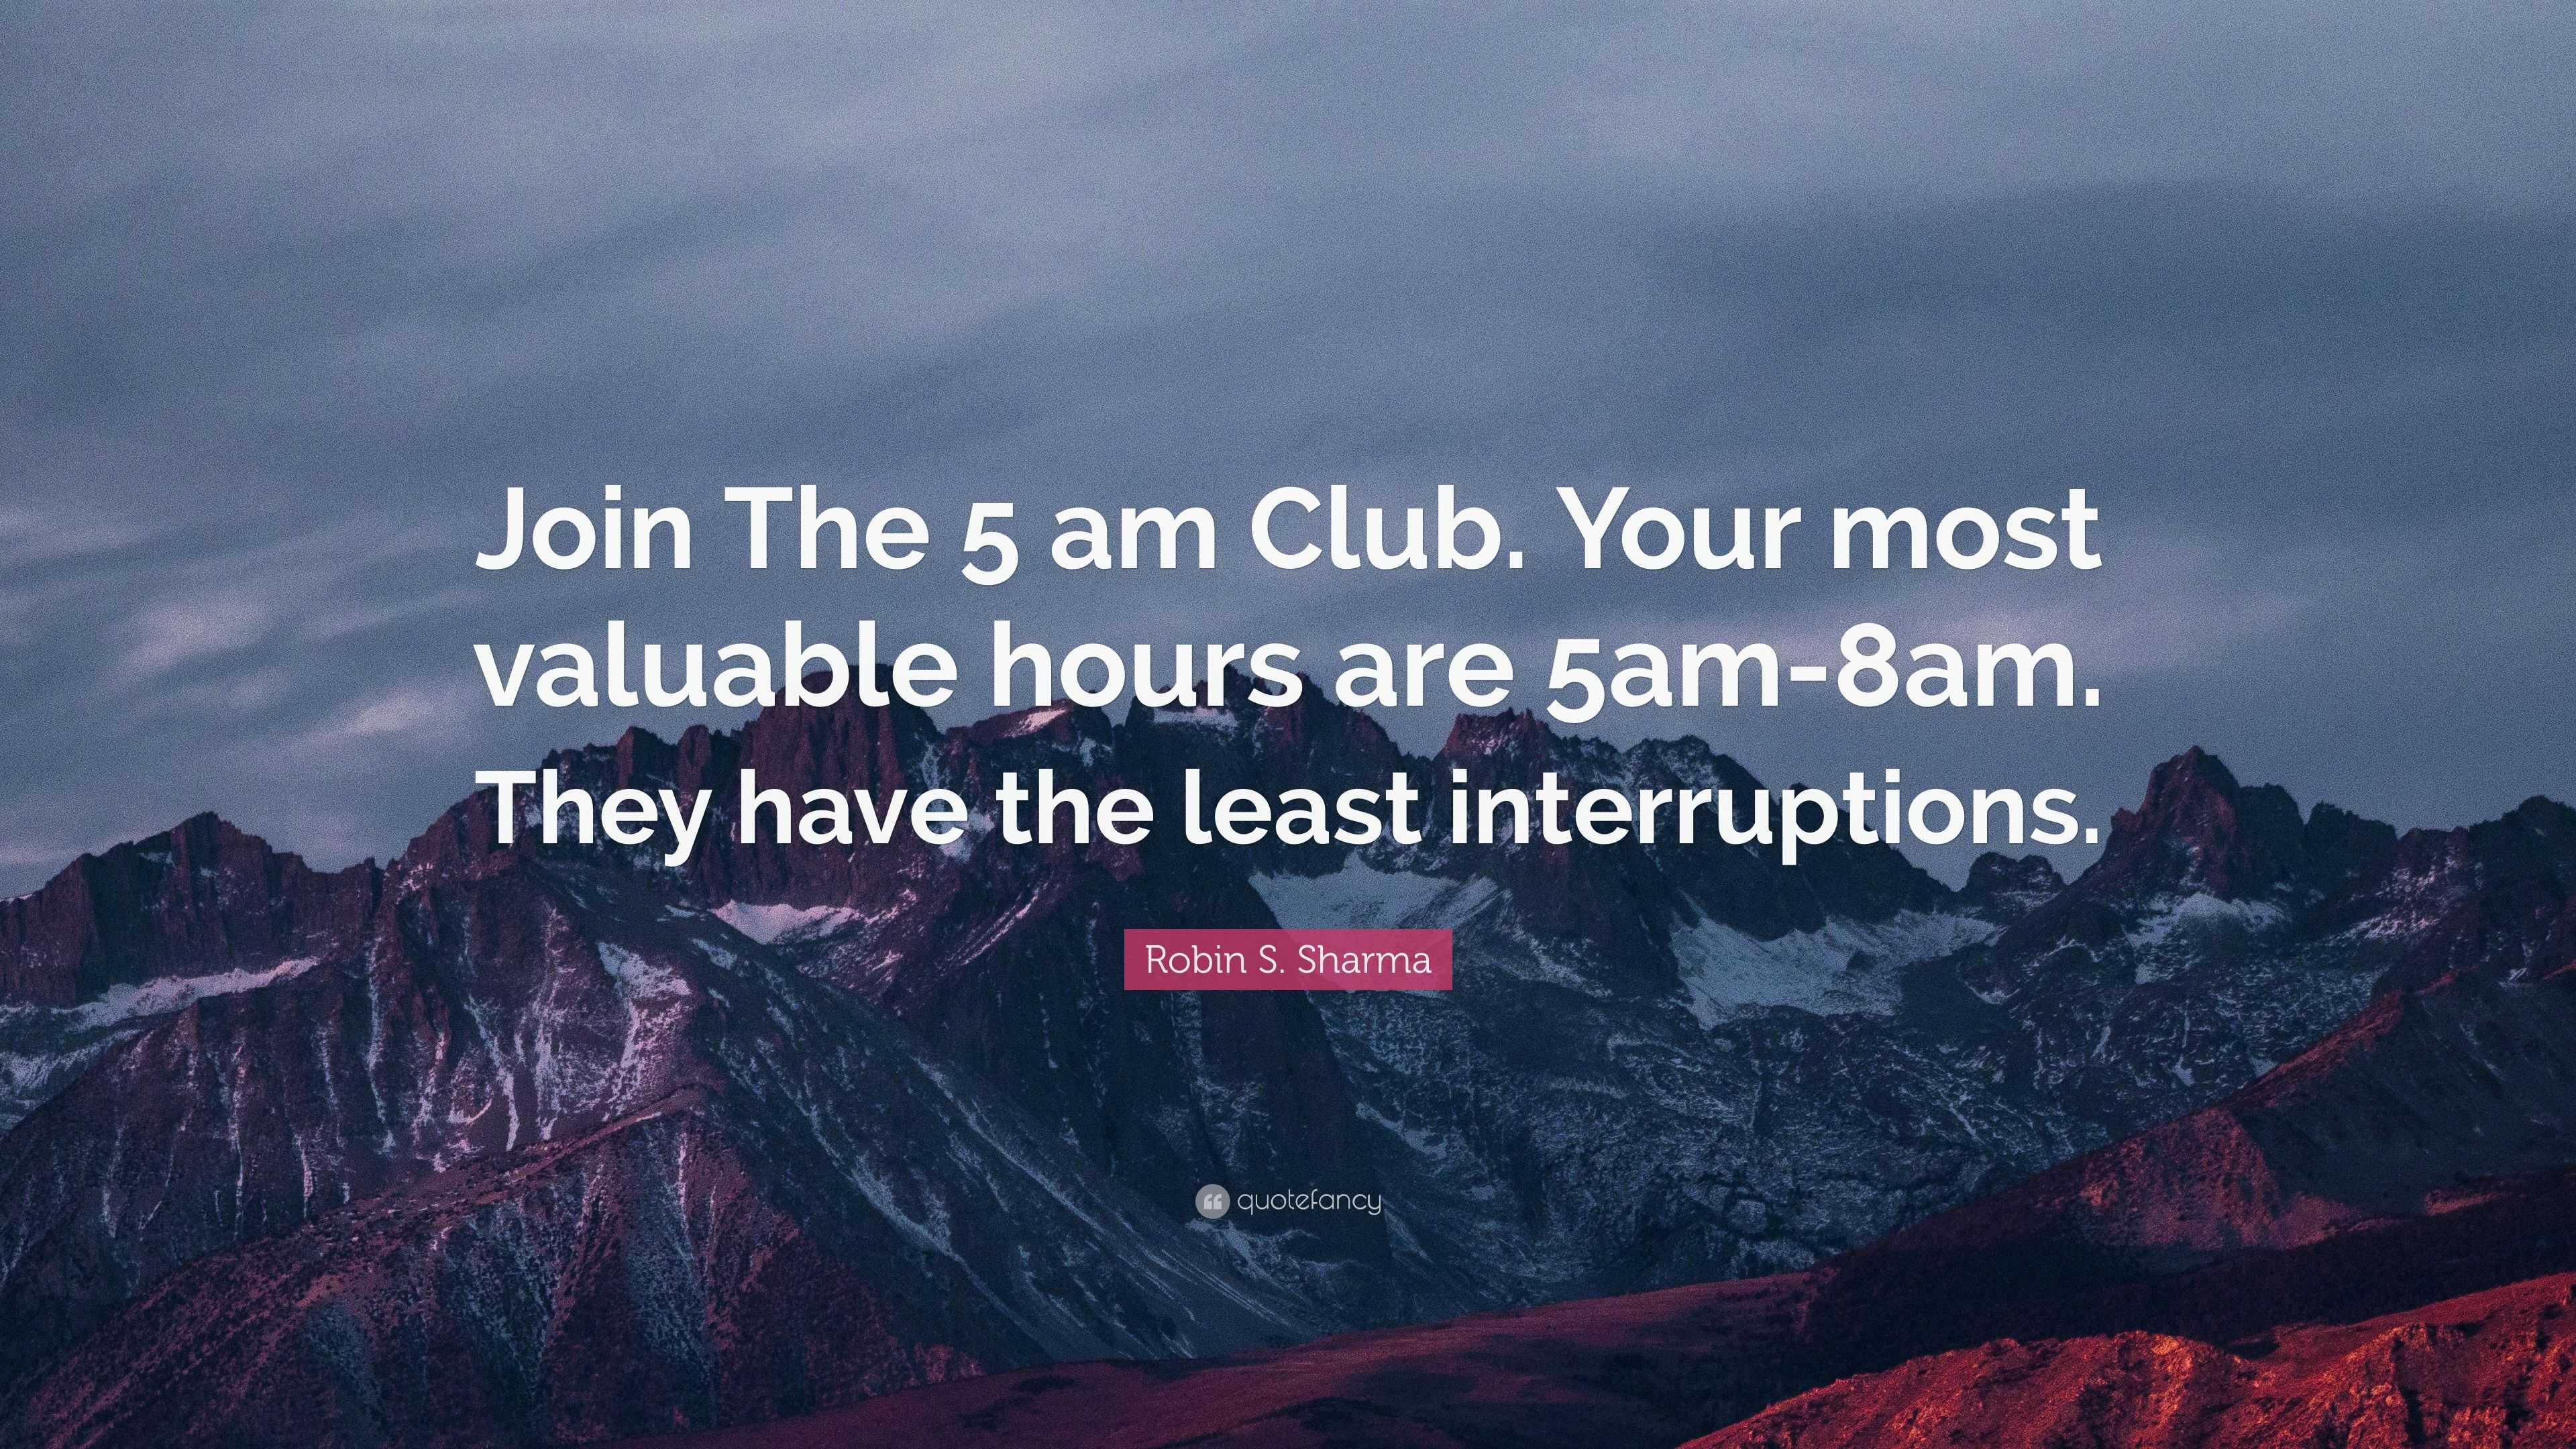 Robin S. Sharma Quote: “Join The 5 am Club. Your most valuable hours ...